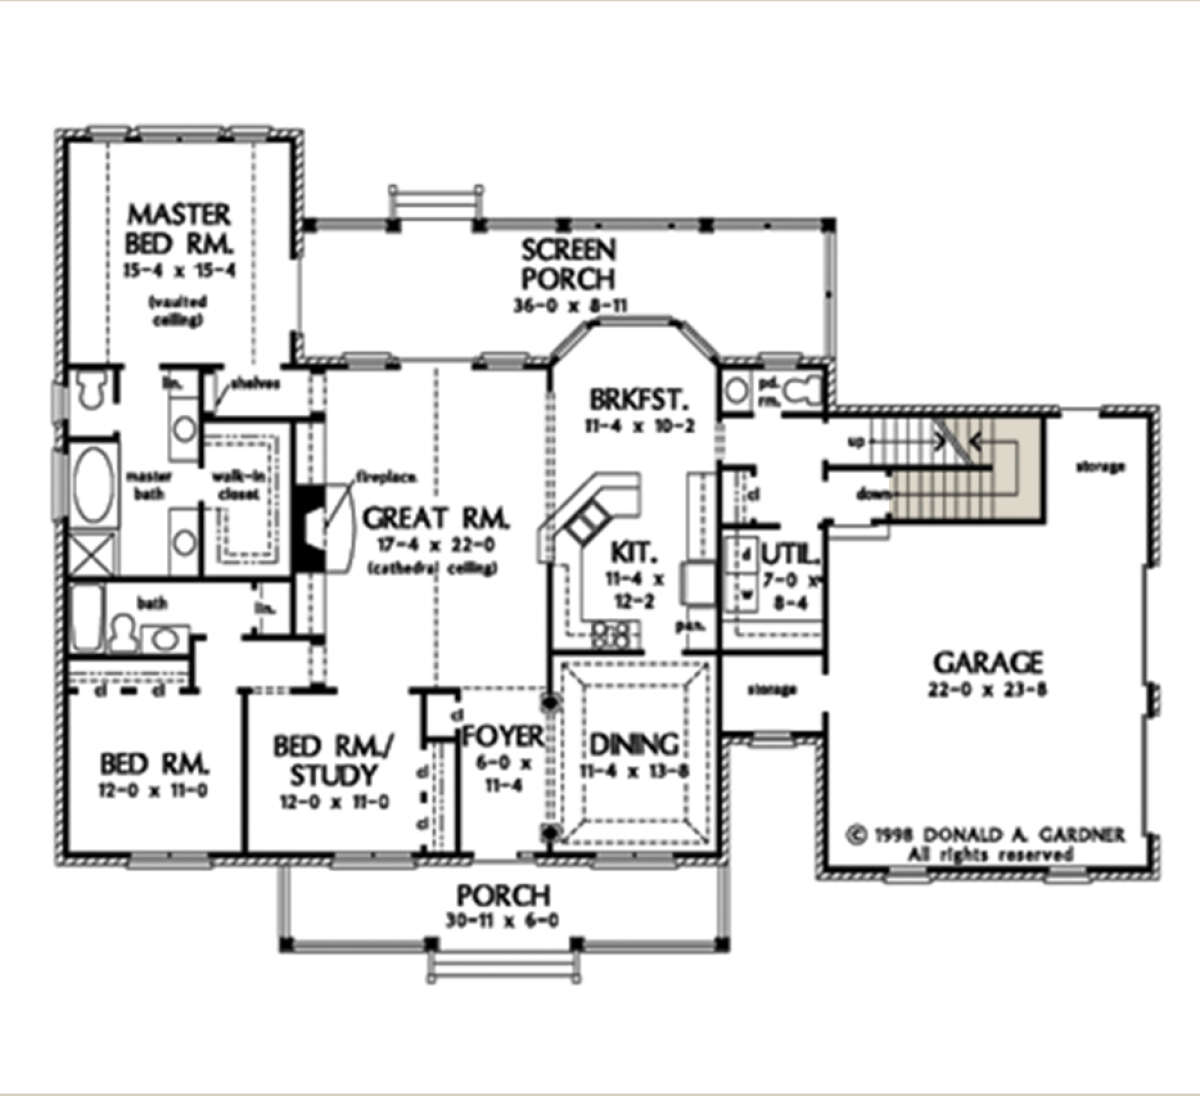 Main Floor w/ Basement Stairs Location for House Plan #2865-00177